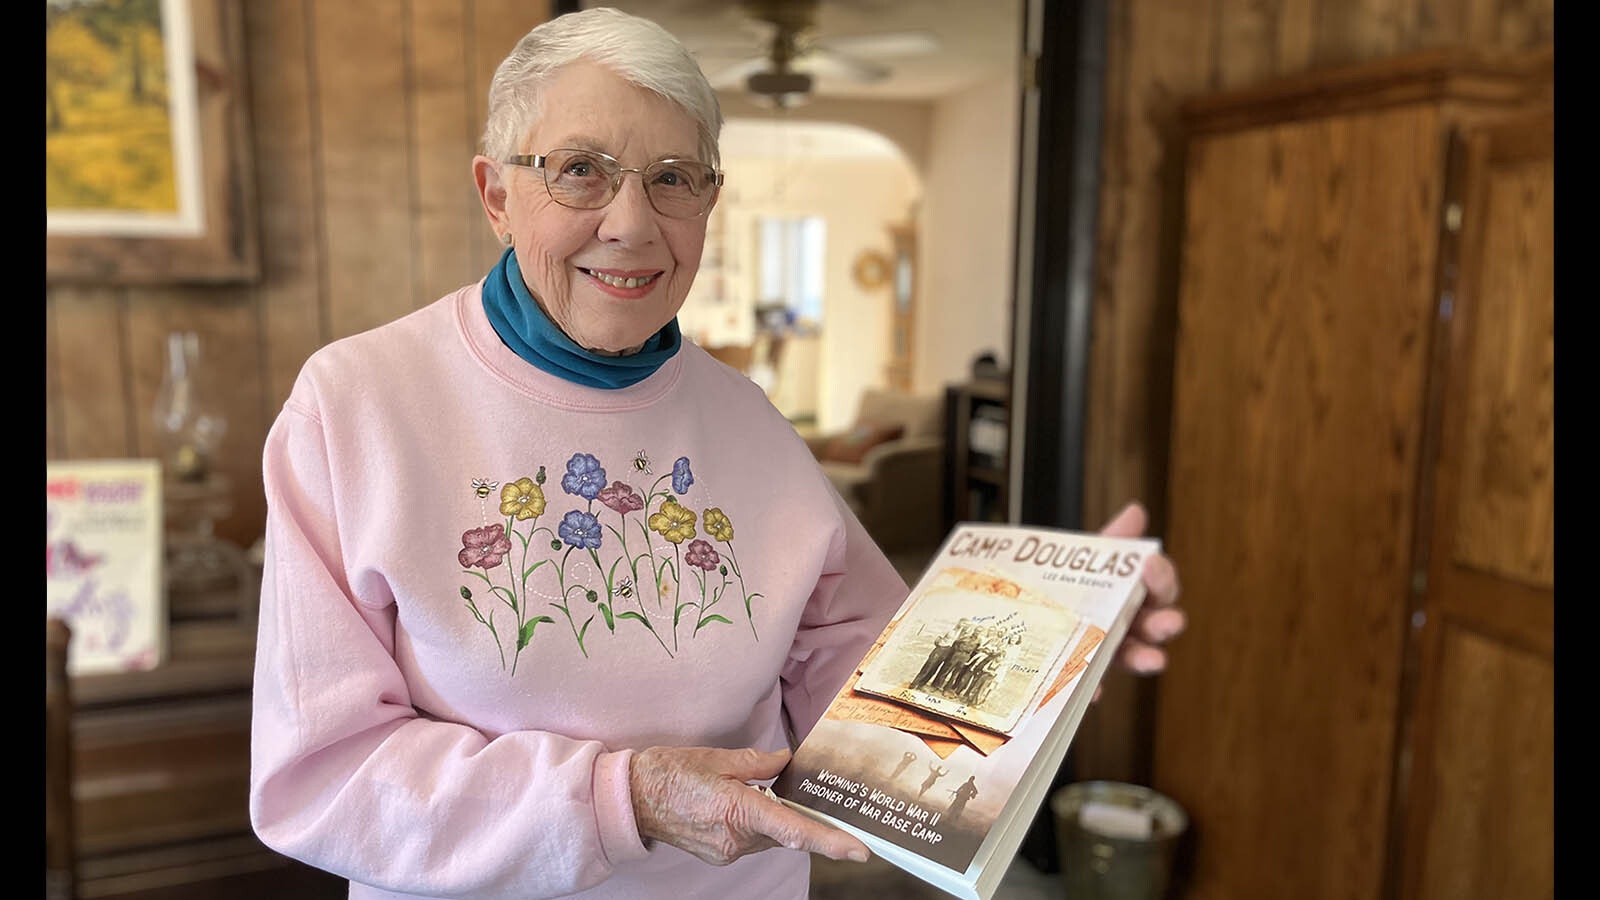 Douglas author Lee Ann Siebken’s latest book focuses on Camp Douglas and the impact POWs at the camp had on the community and region for good.